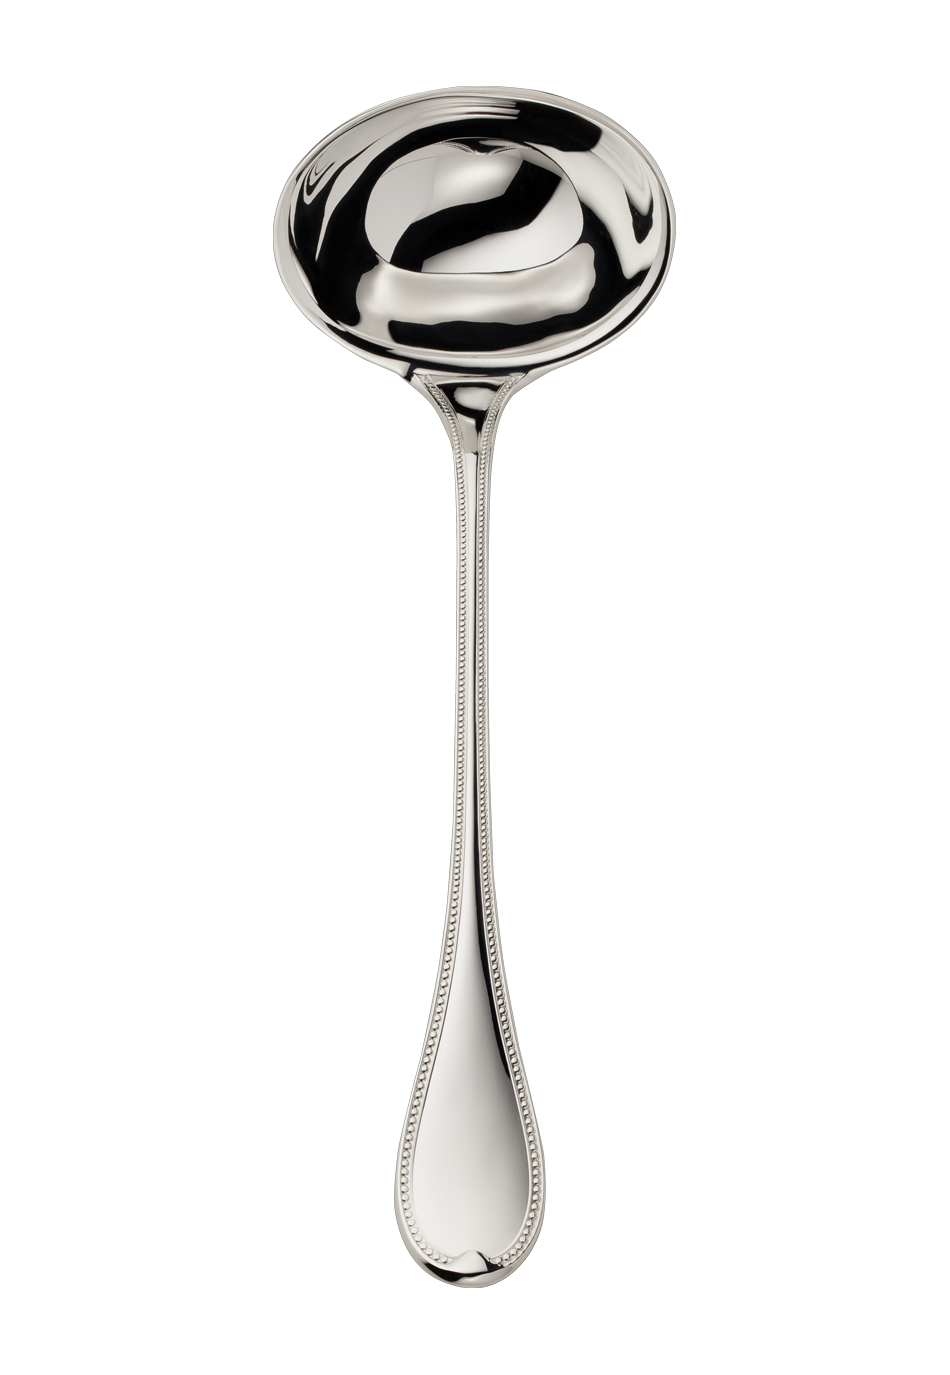 Franz. Perl Soup Ladle (150g massive silverplated)